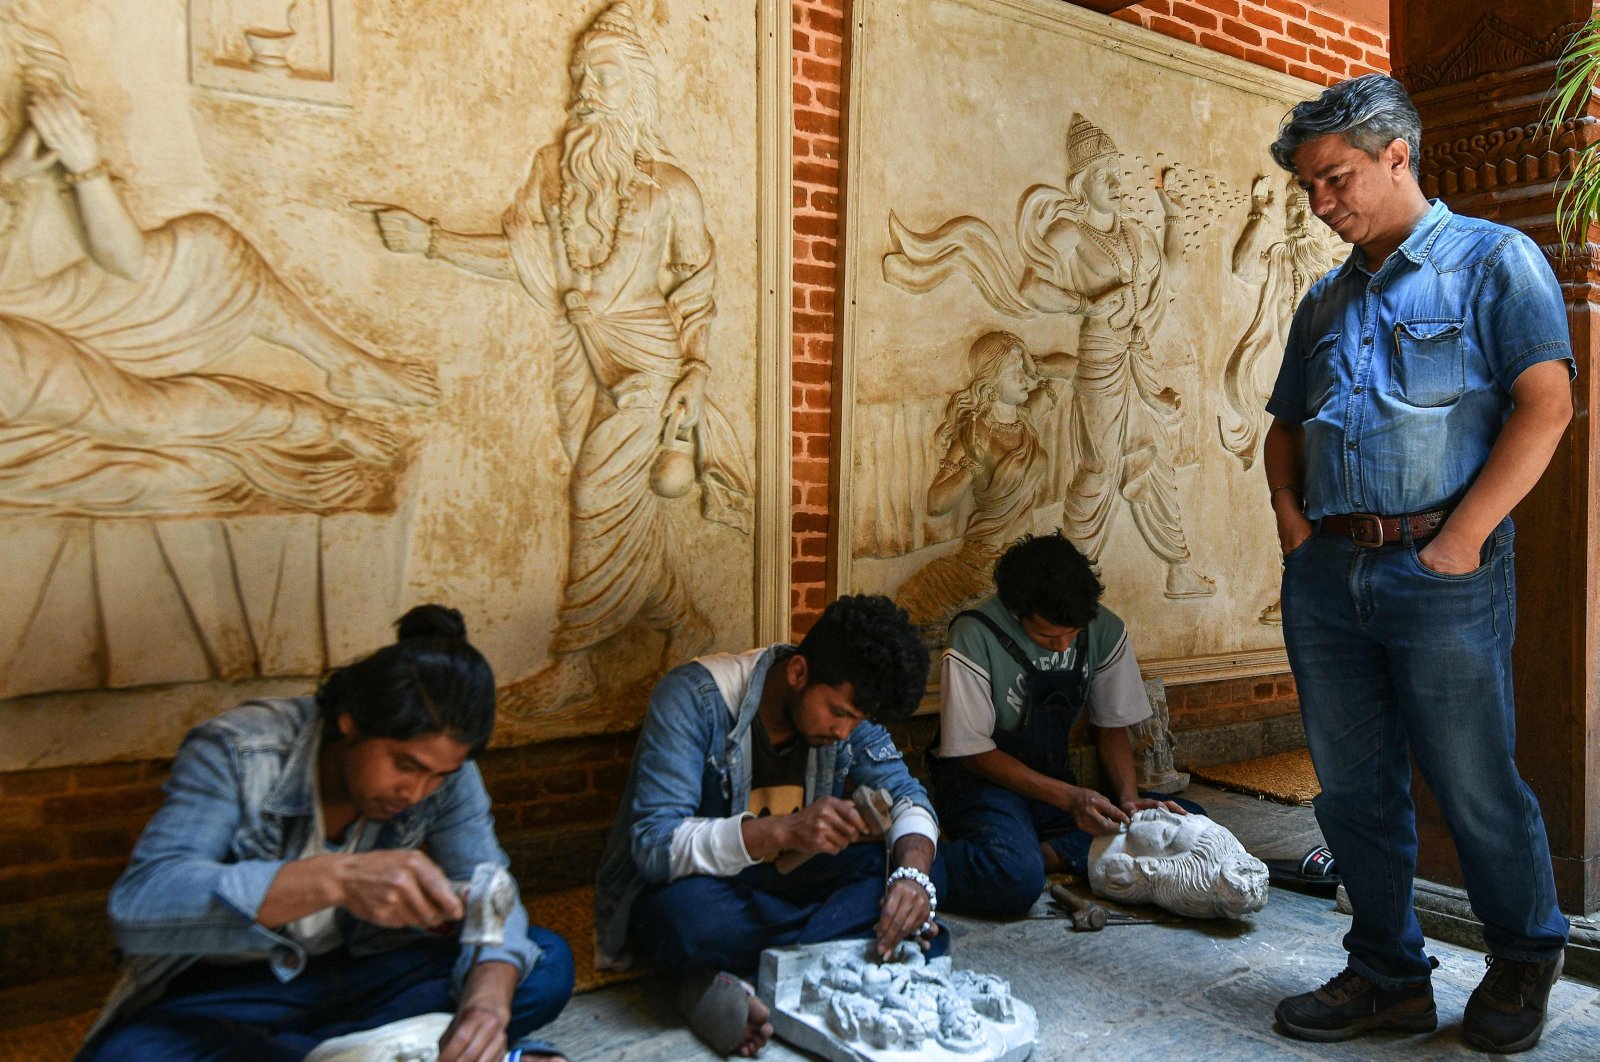 Heritage conservationist and Nepal Vocational Academy founder Rabindra Puri (R) watches artisans sculpt stone structures at the academy in Bhaktapur on the outskirts of Kathmandu, Nepal, July 14, 2023. (AFP Photo)